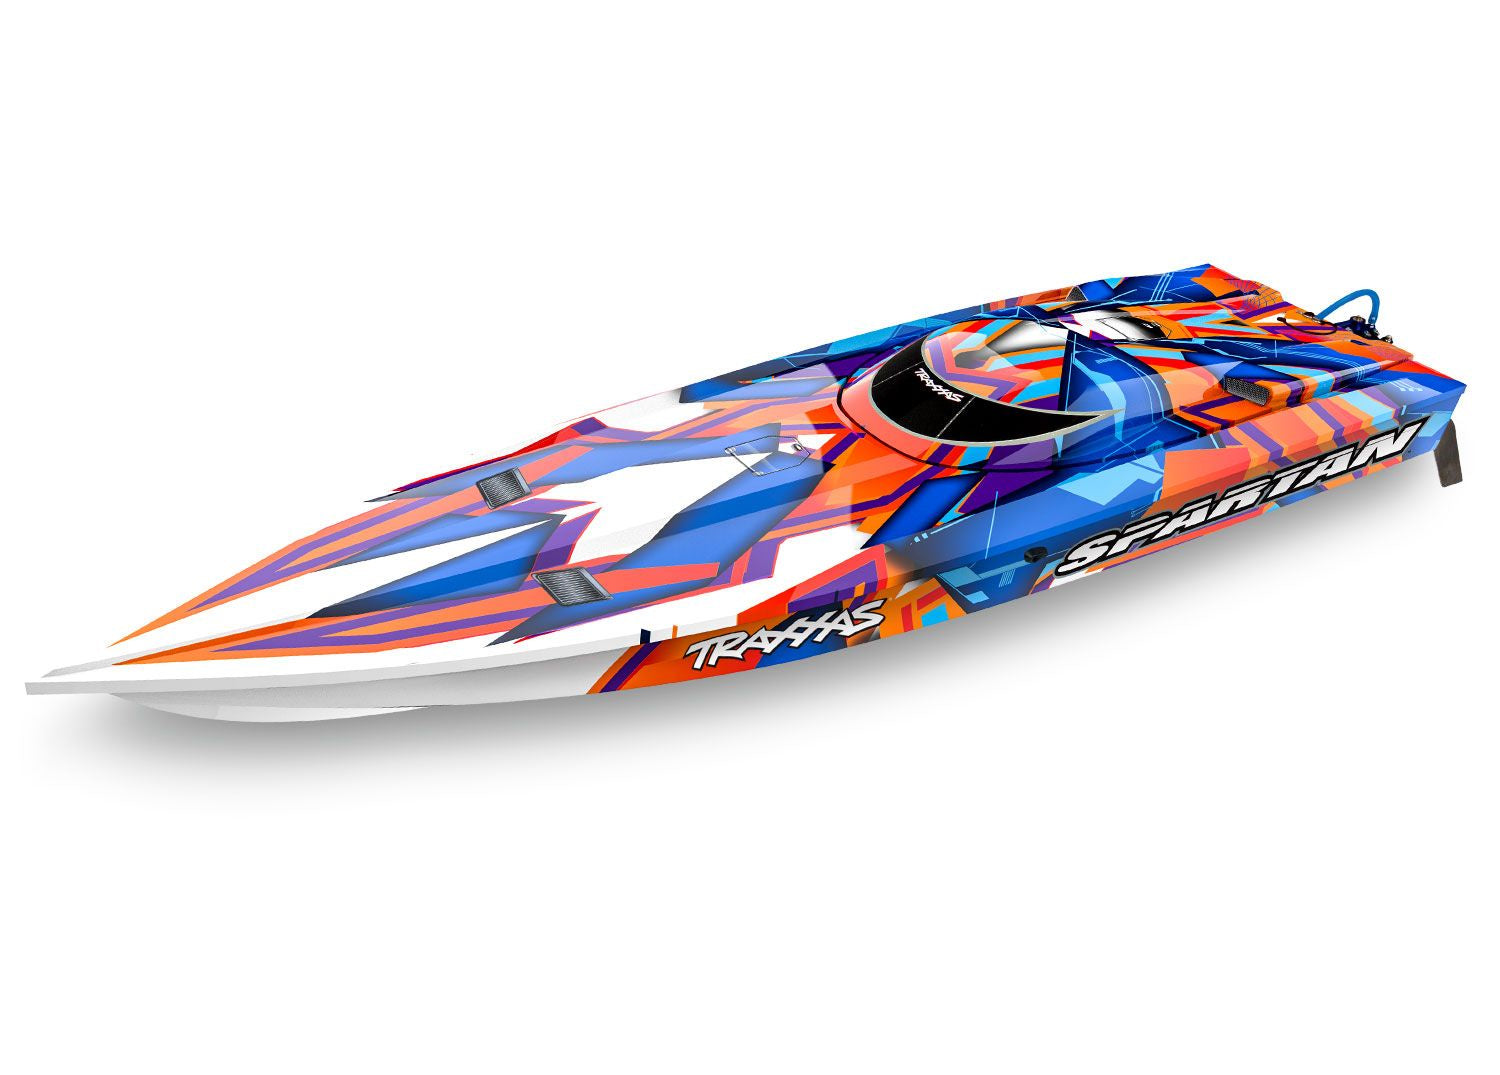 Orange Spartan: Brushless 36" Race Boat with TQi™ Traxxas Link™ Enabled 2.4GHz Radio System and Traxxas Stability Management (TSM)®